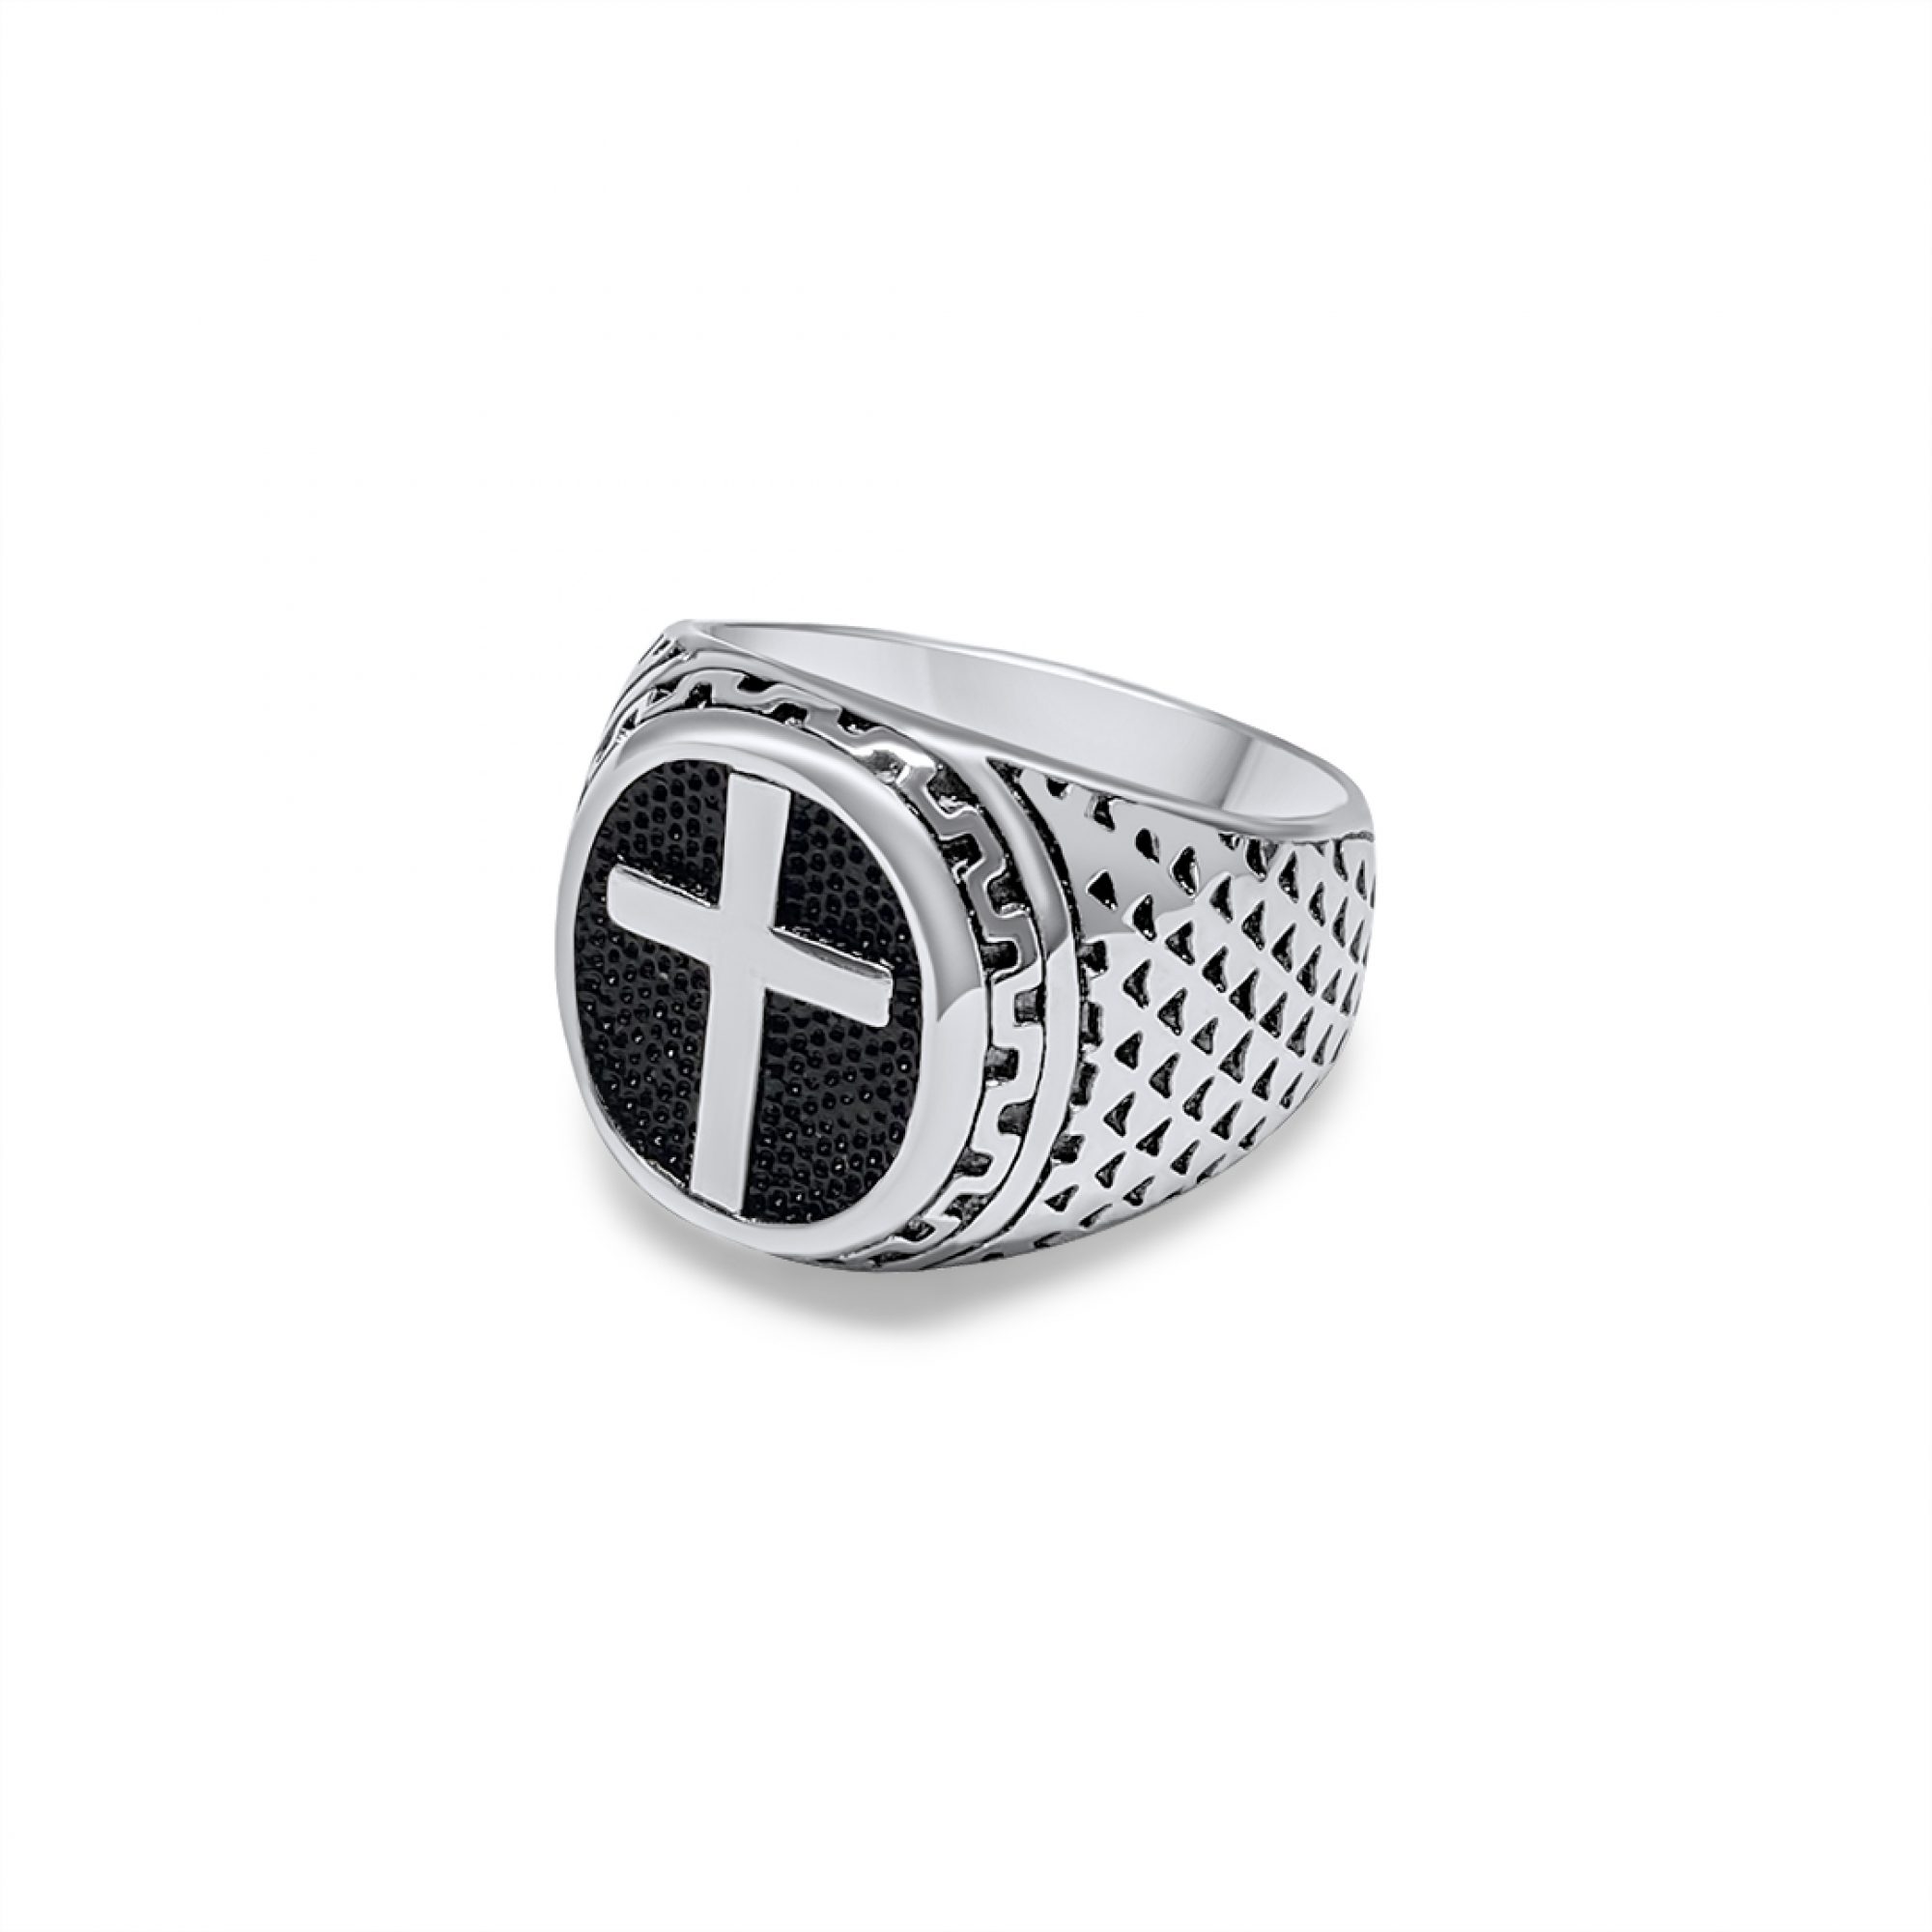 Steel ring with cross